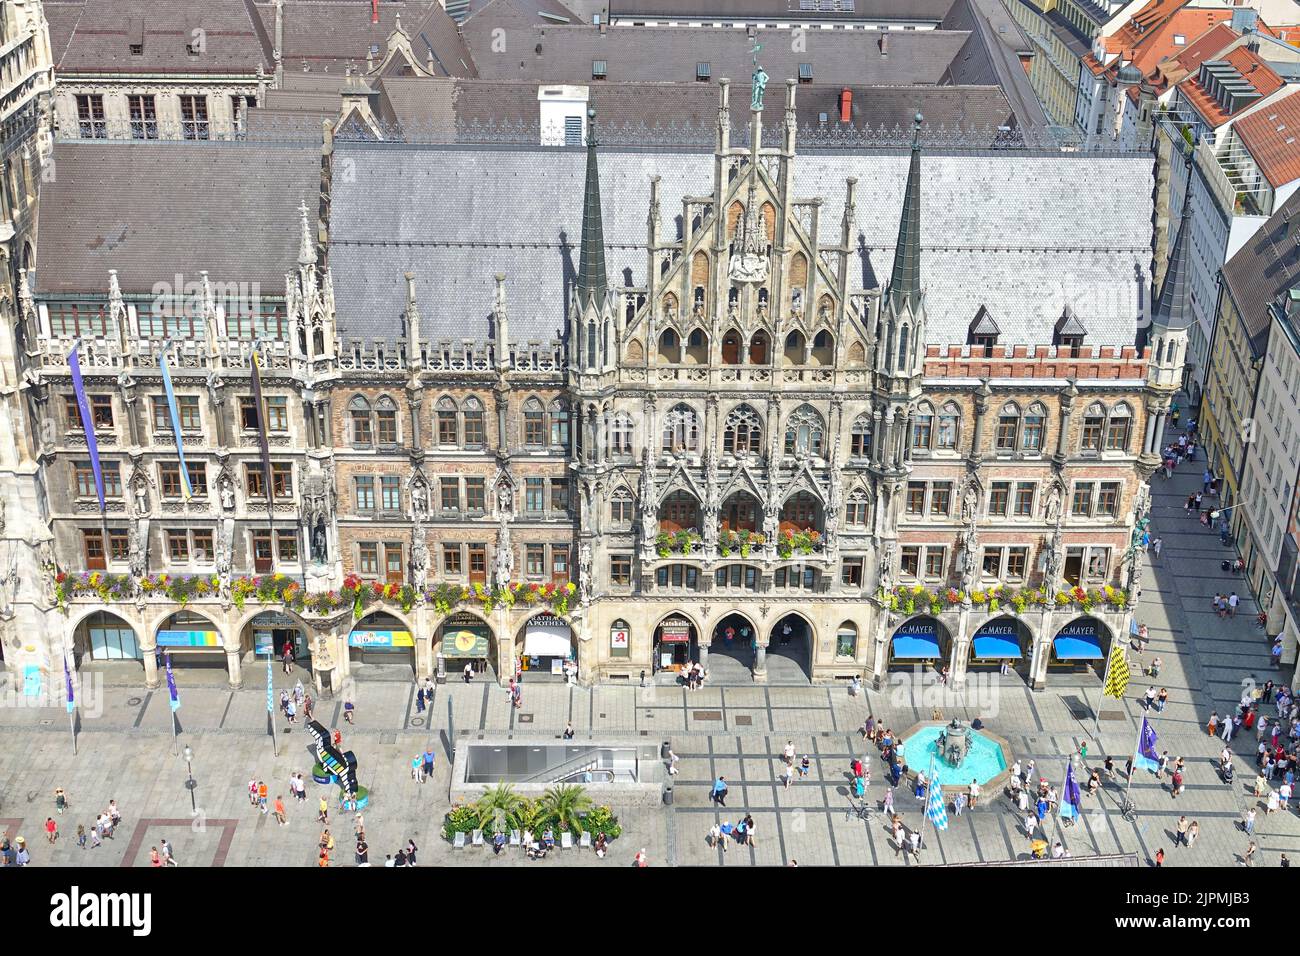 Panoramic view of the old medieval Gothic architecture City Hall building at Marienplatz. Square.  Munich, GERMANY - August 2022 Stock Photo